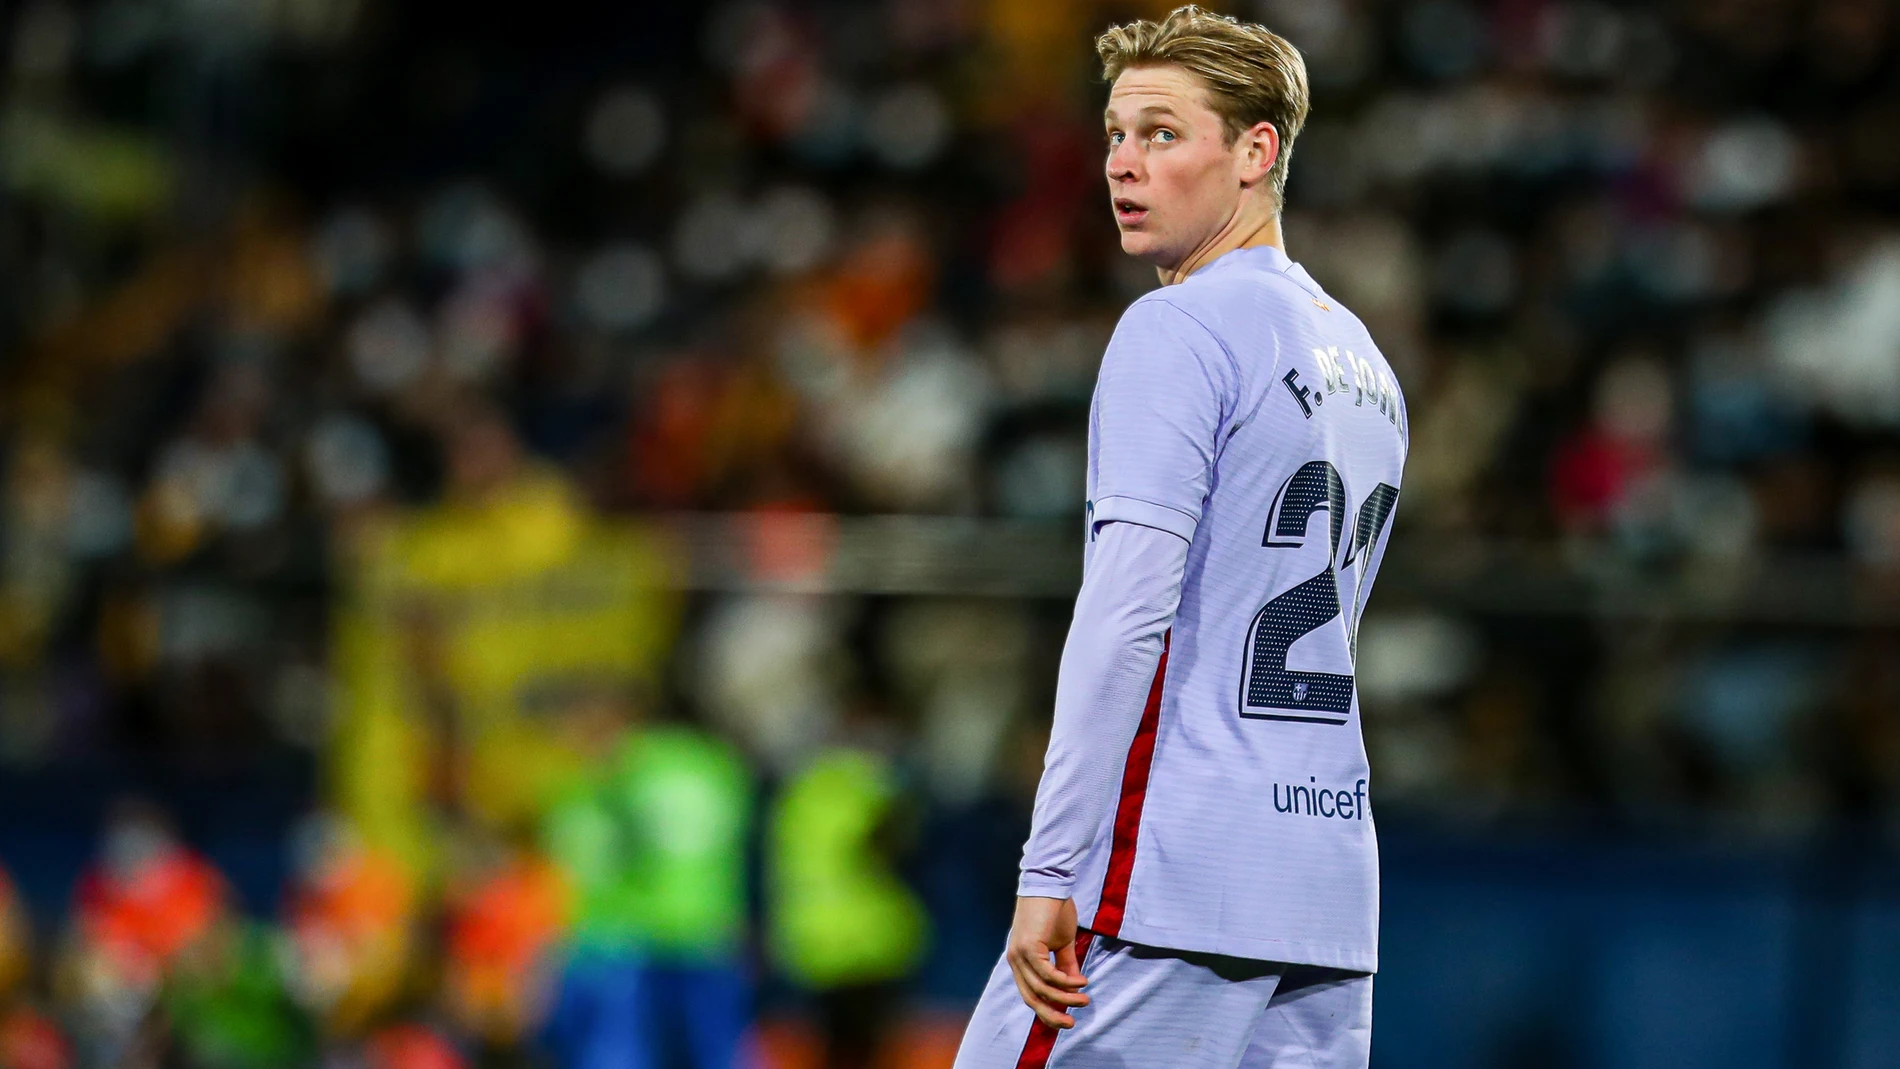 Frenkie de Jong of FC Barcelona looks on during the Santander League match between Villareal CF and FC Barcelona at the Ceramica Stadium on November 27, 2021, in Valencia, Spain.AFP7 27/11/2021 ONLY FOR USE IN SPAIN